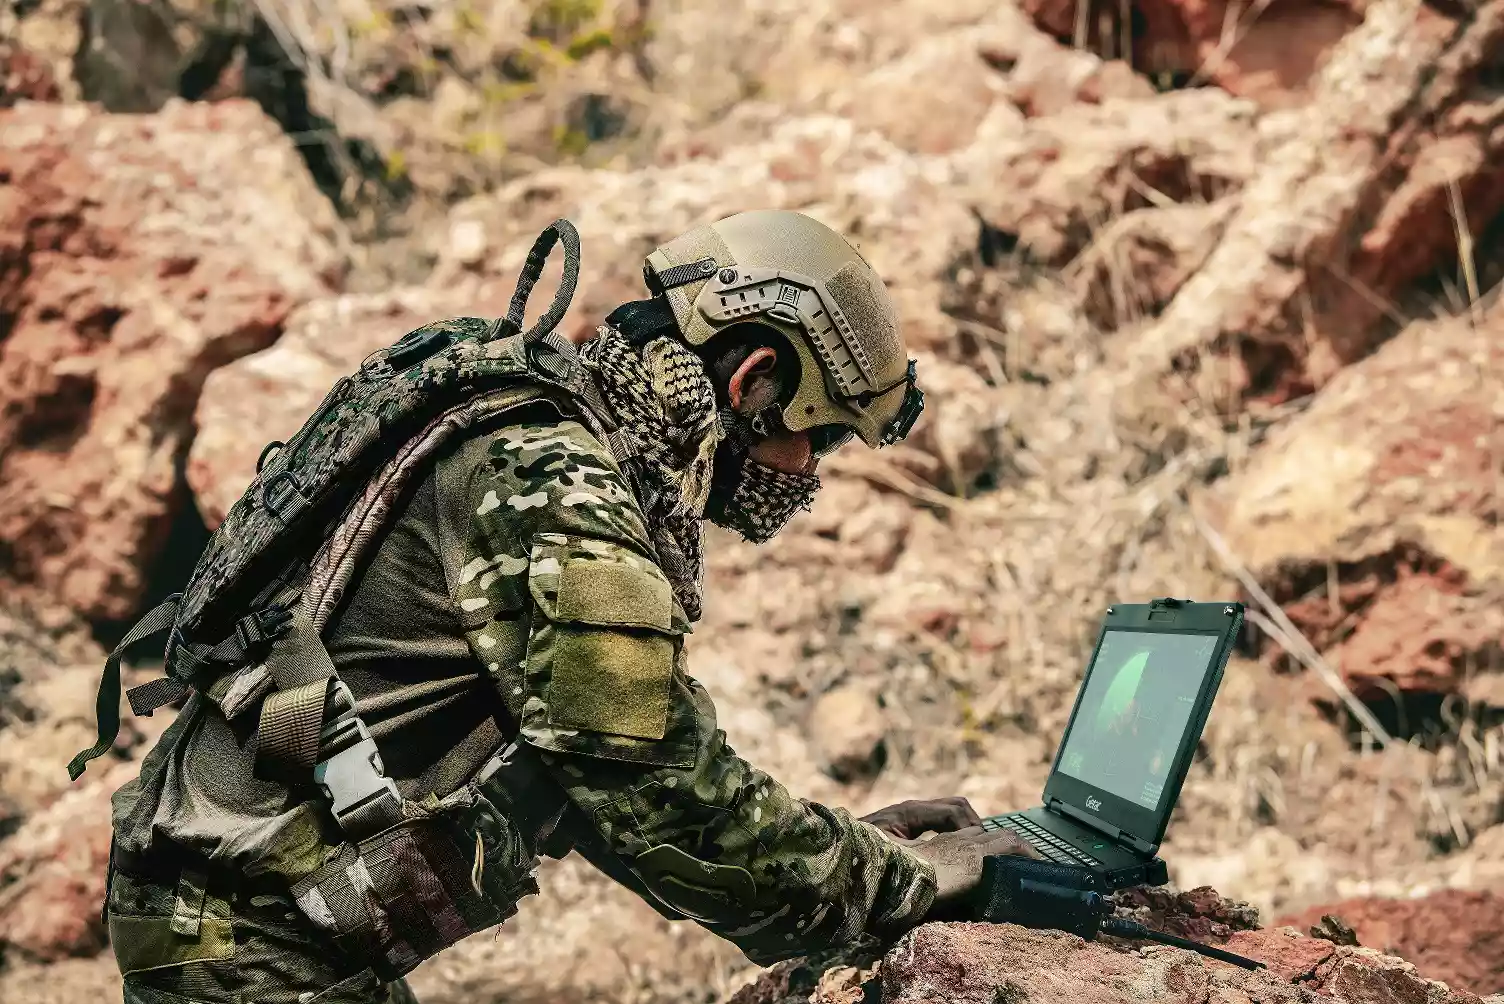 Getac computers are rugged, reliable field partners